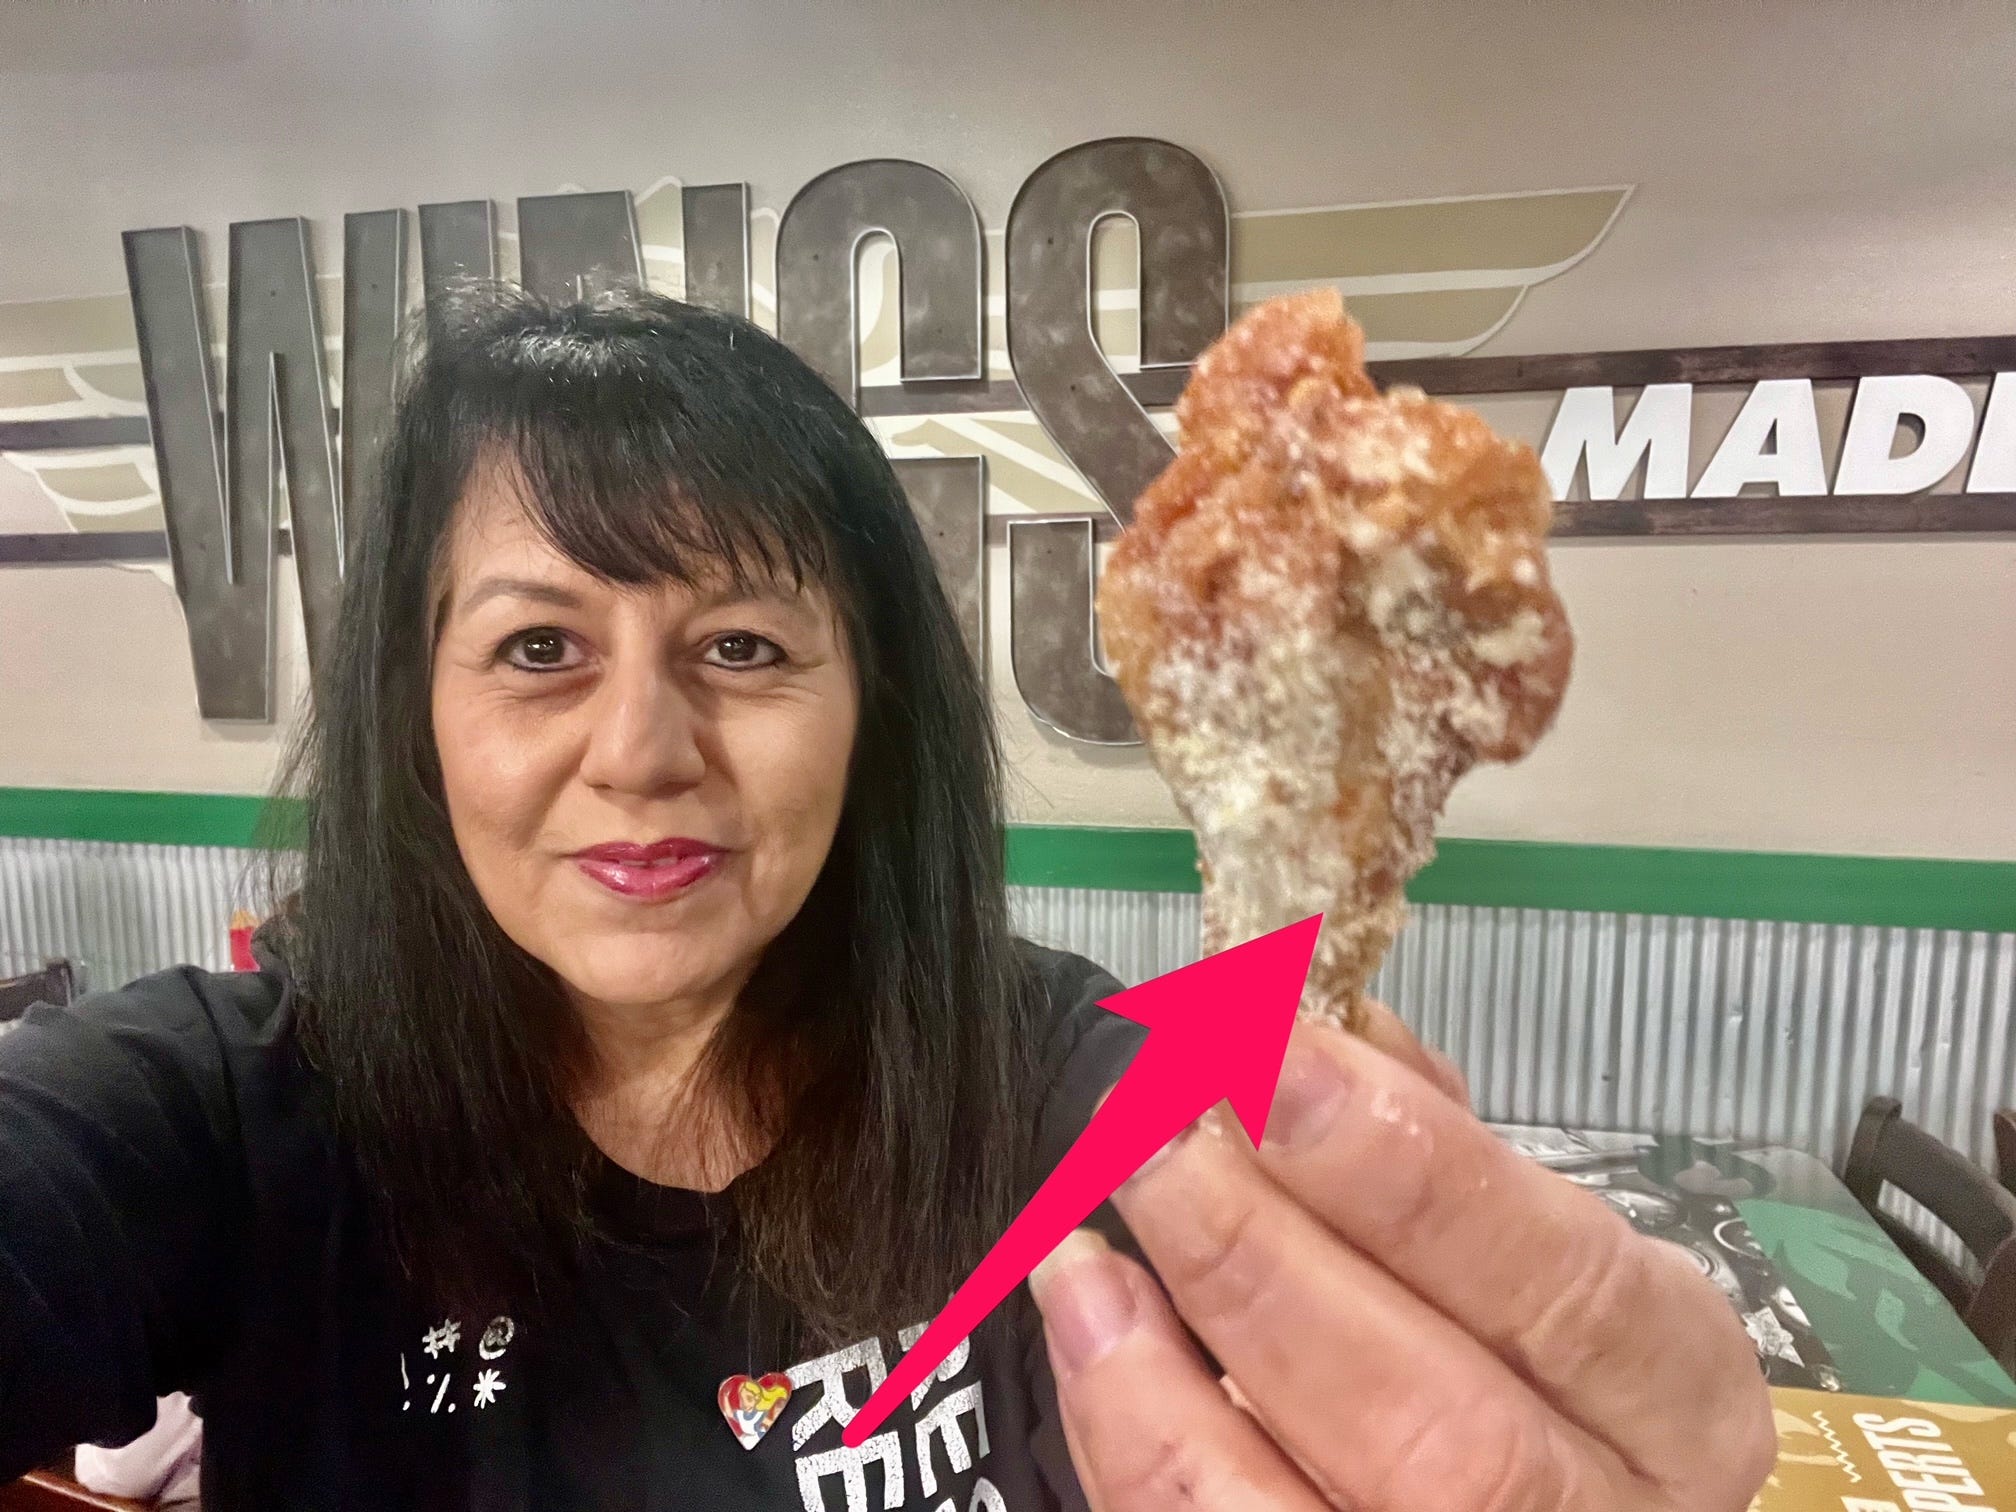 <p>The Parmesan cheese was clearly dusted on top of the wing with a shaker. At Popeyes, the cheese was part of the sauce, so you could taste it with every bite.</p><p>The Wingstop wing doesn't have thick breading, so it had no crunchy texture like Popeyes. The clumpy grated cheese barely clings to the wing. Half of the Wingstop grated cheese fell to the table or on my shirt.</p><p><strong>Winner: Popeyes</strong></p>